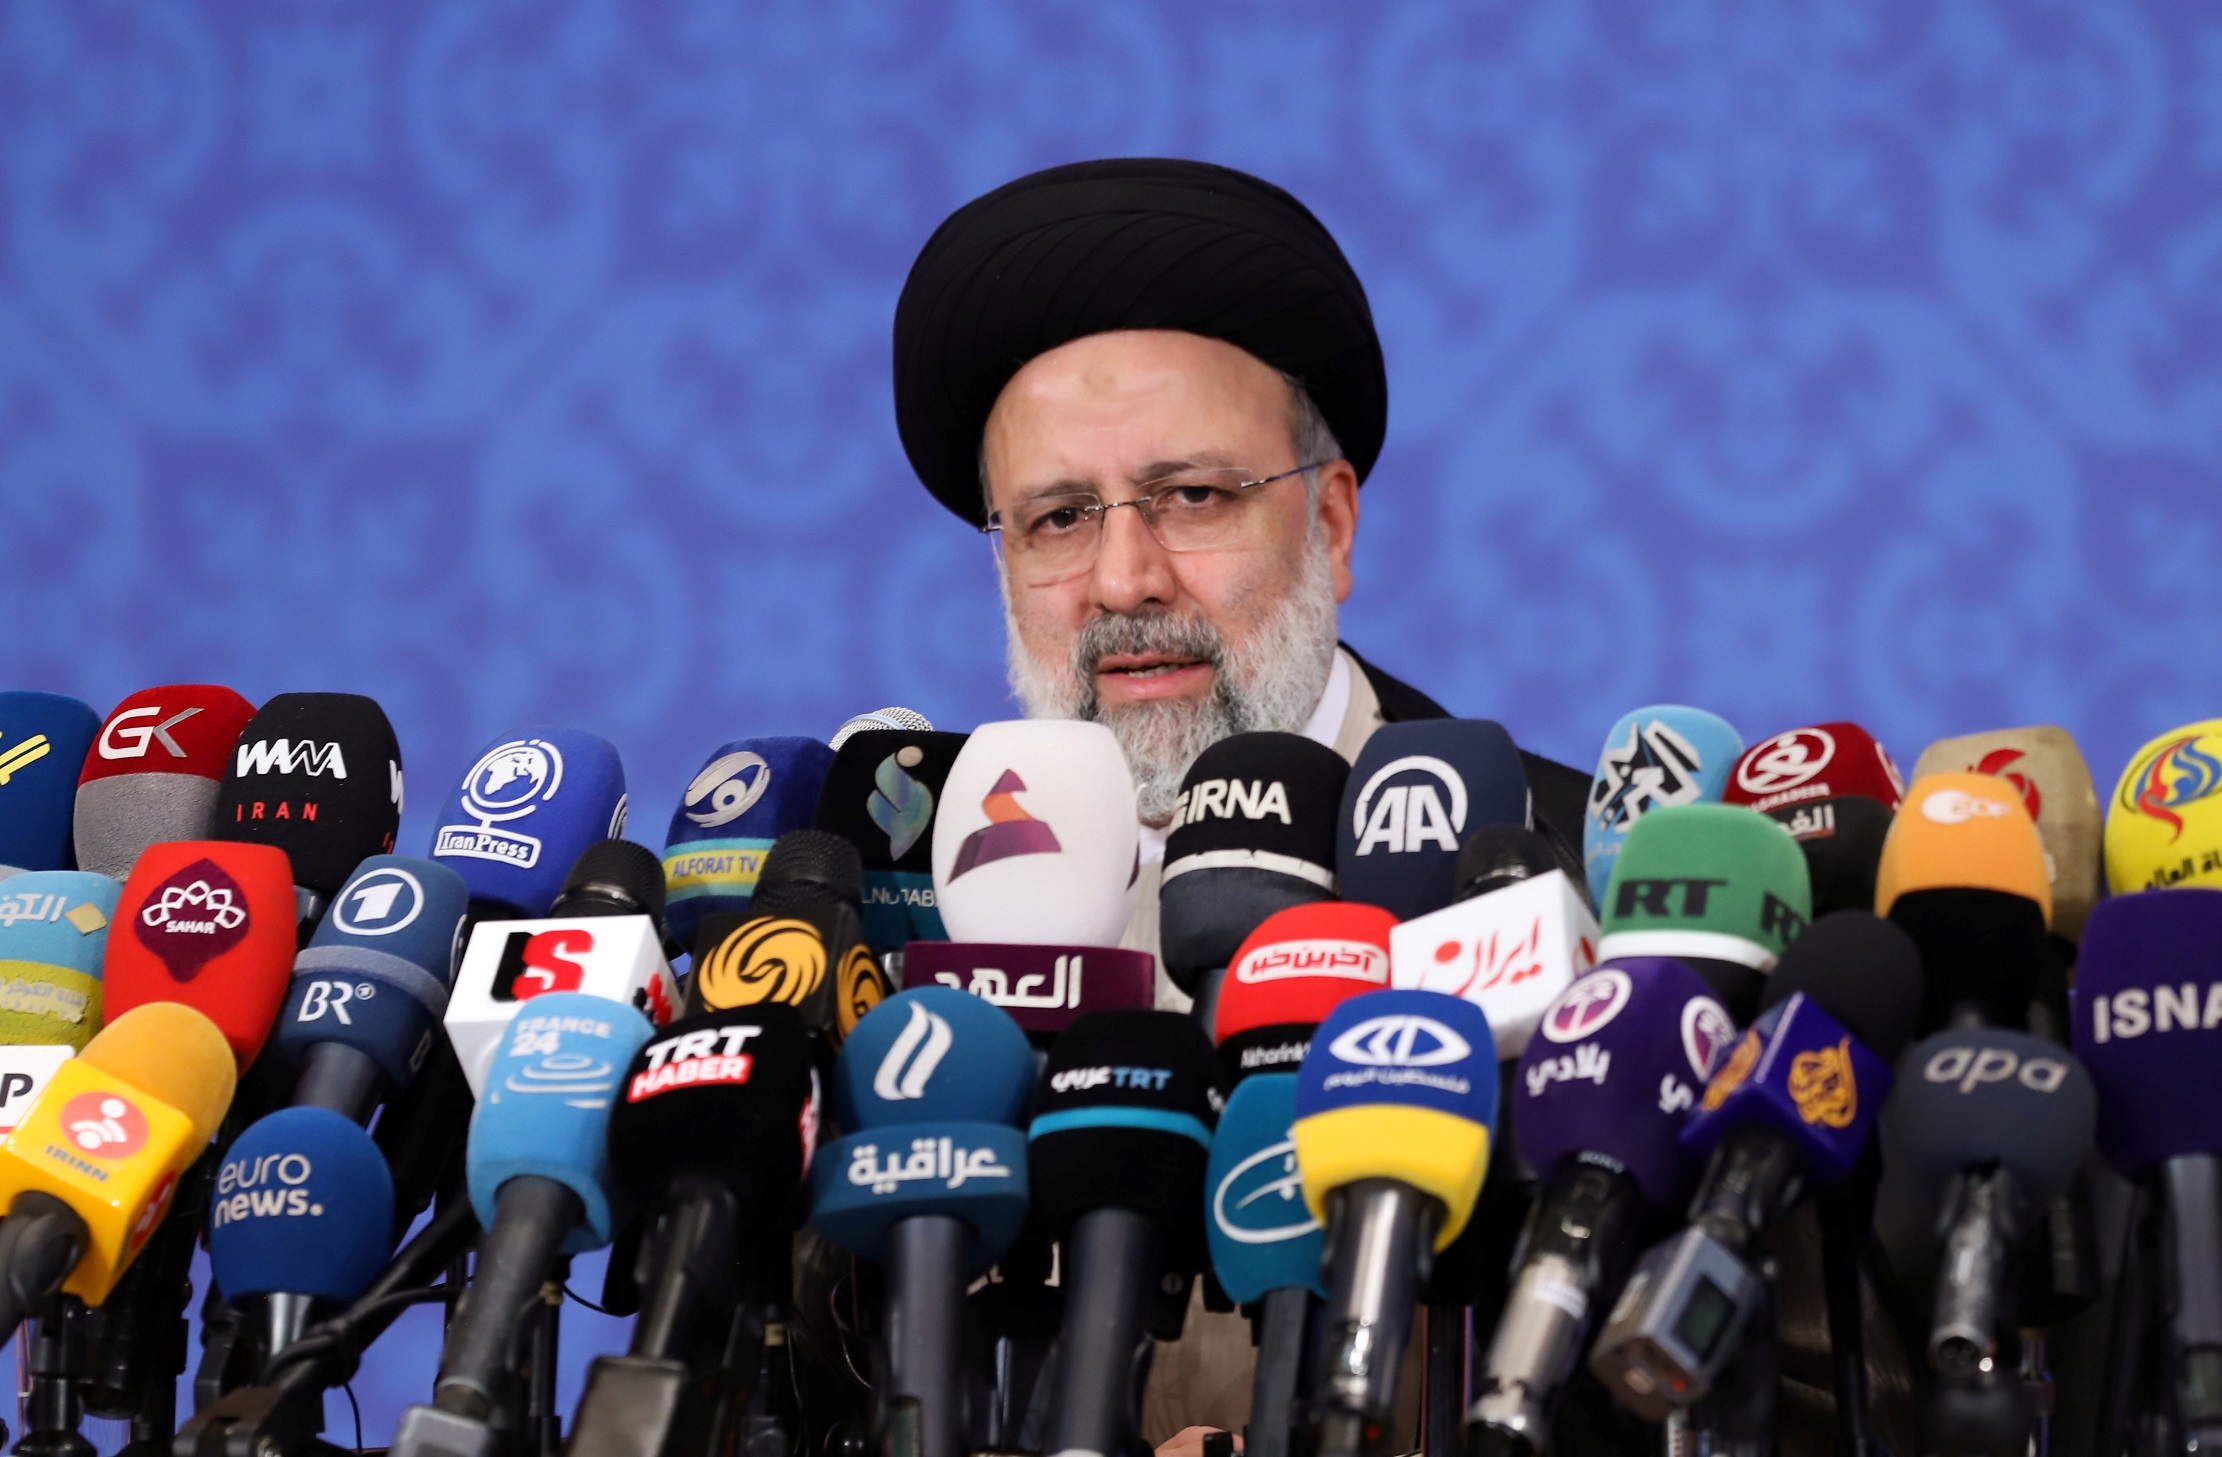 iran-s-president-elect-raisi-unlikely-to-derail-nuclear-deal-return